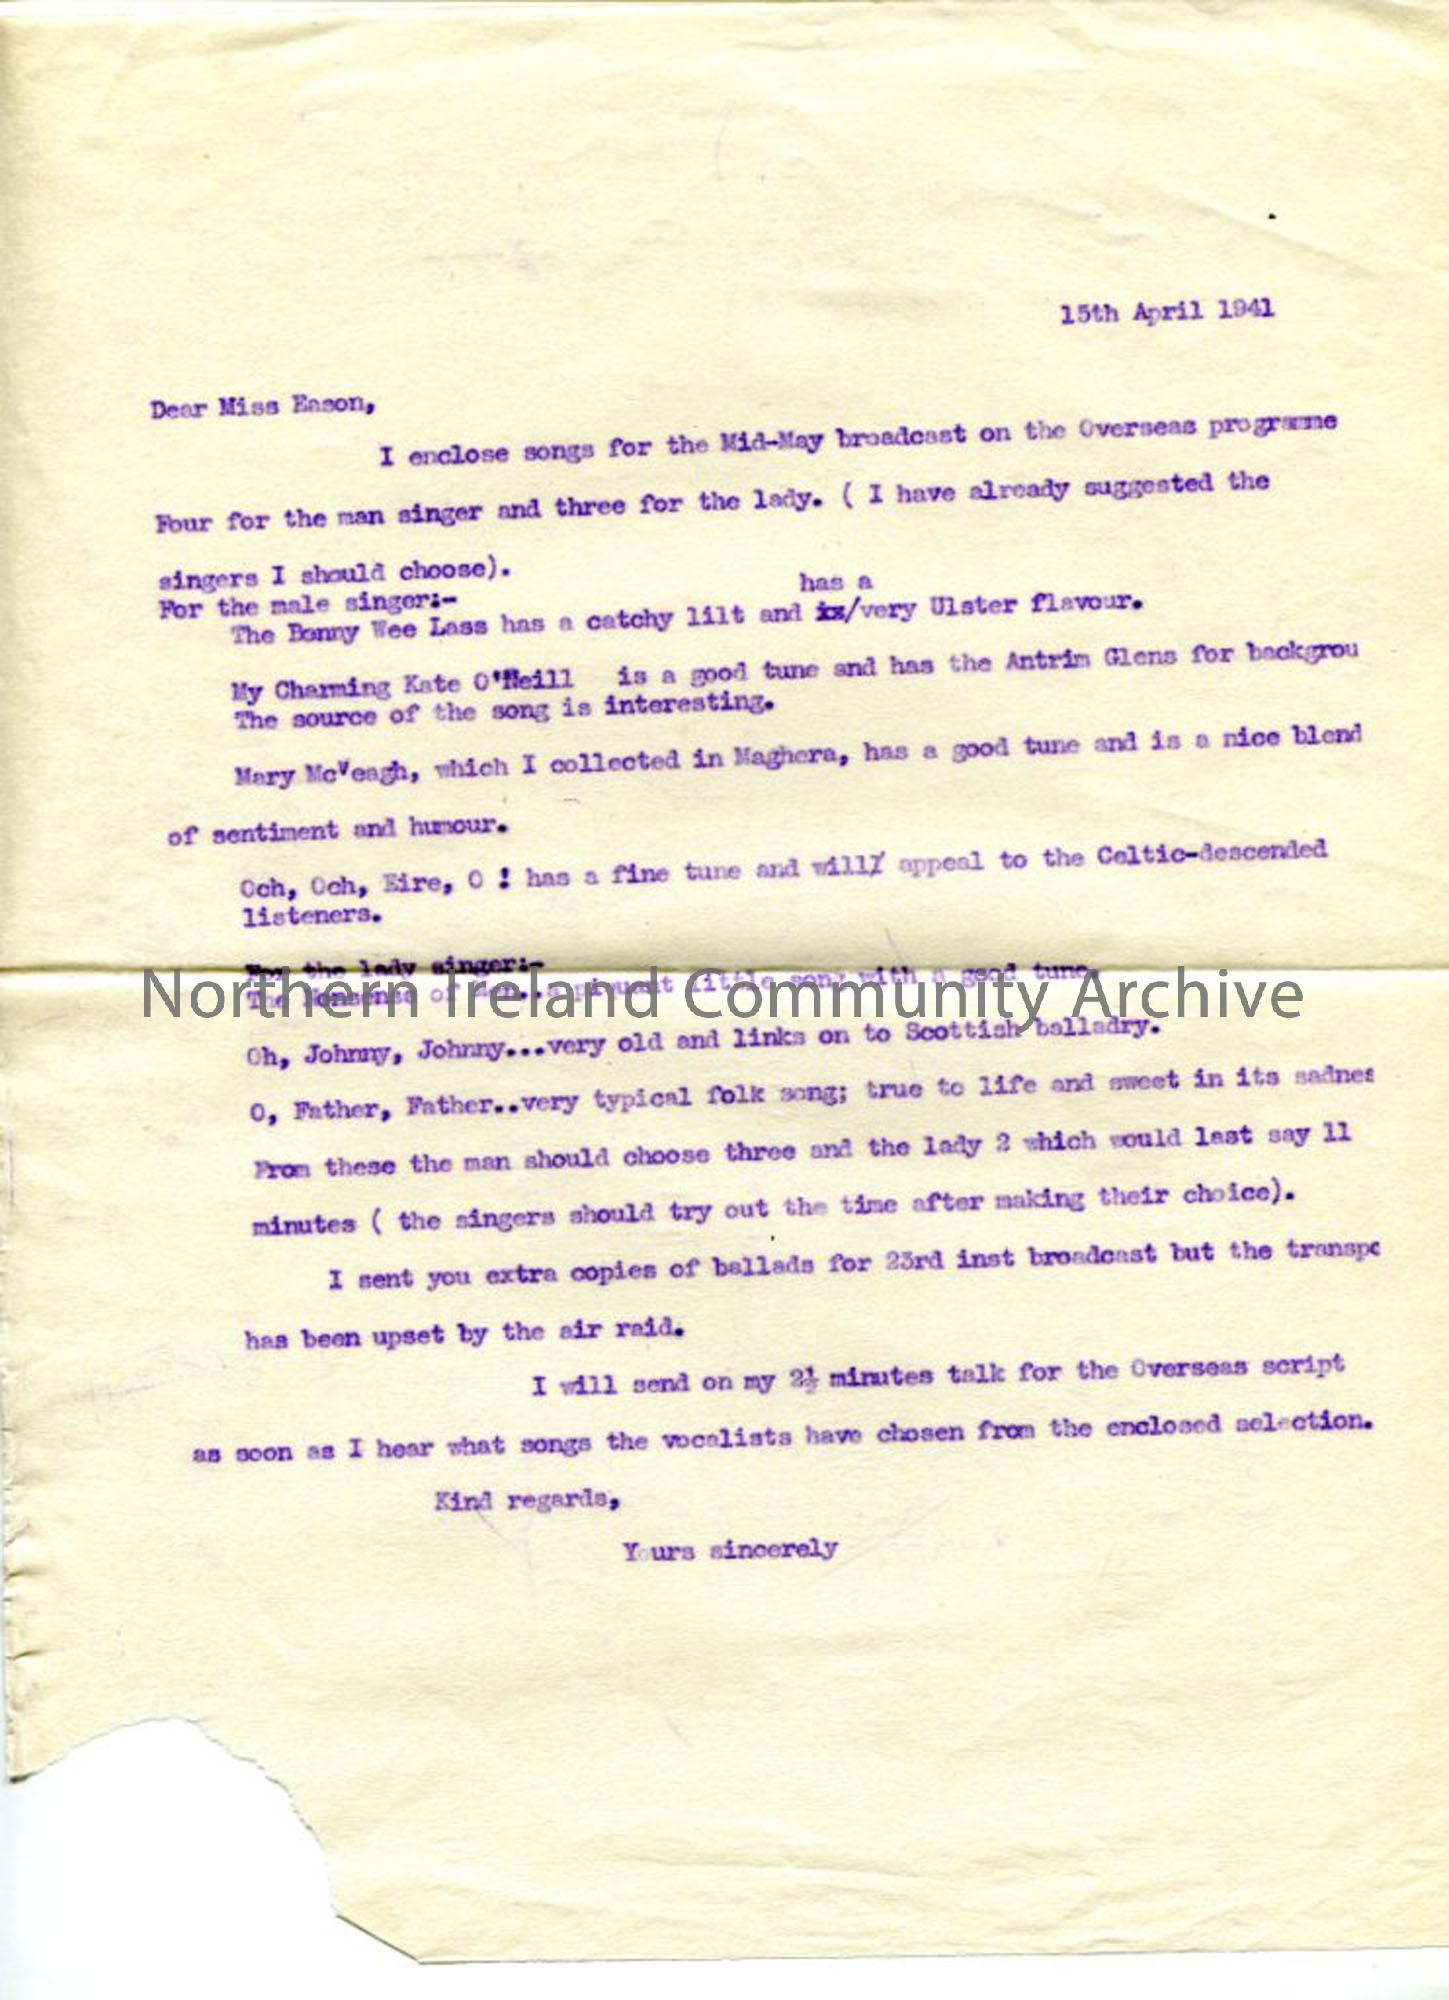 Letter to Miss Eason of the BBC from Sam, dated 15.4.1941